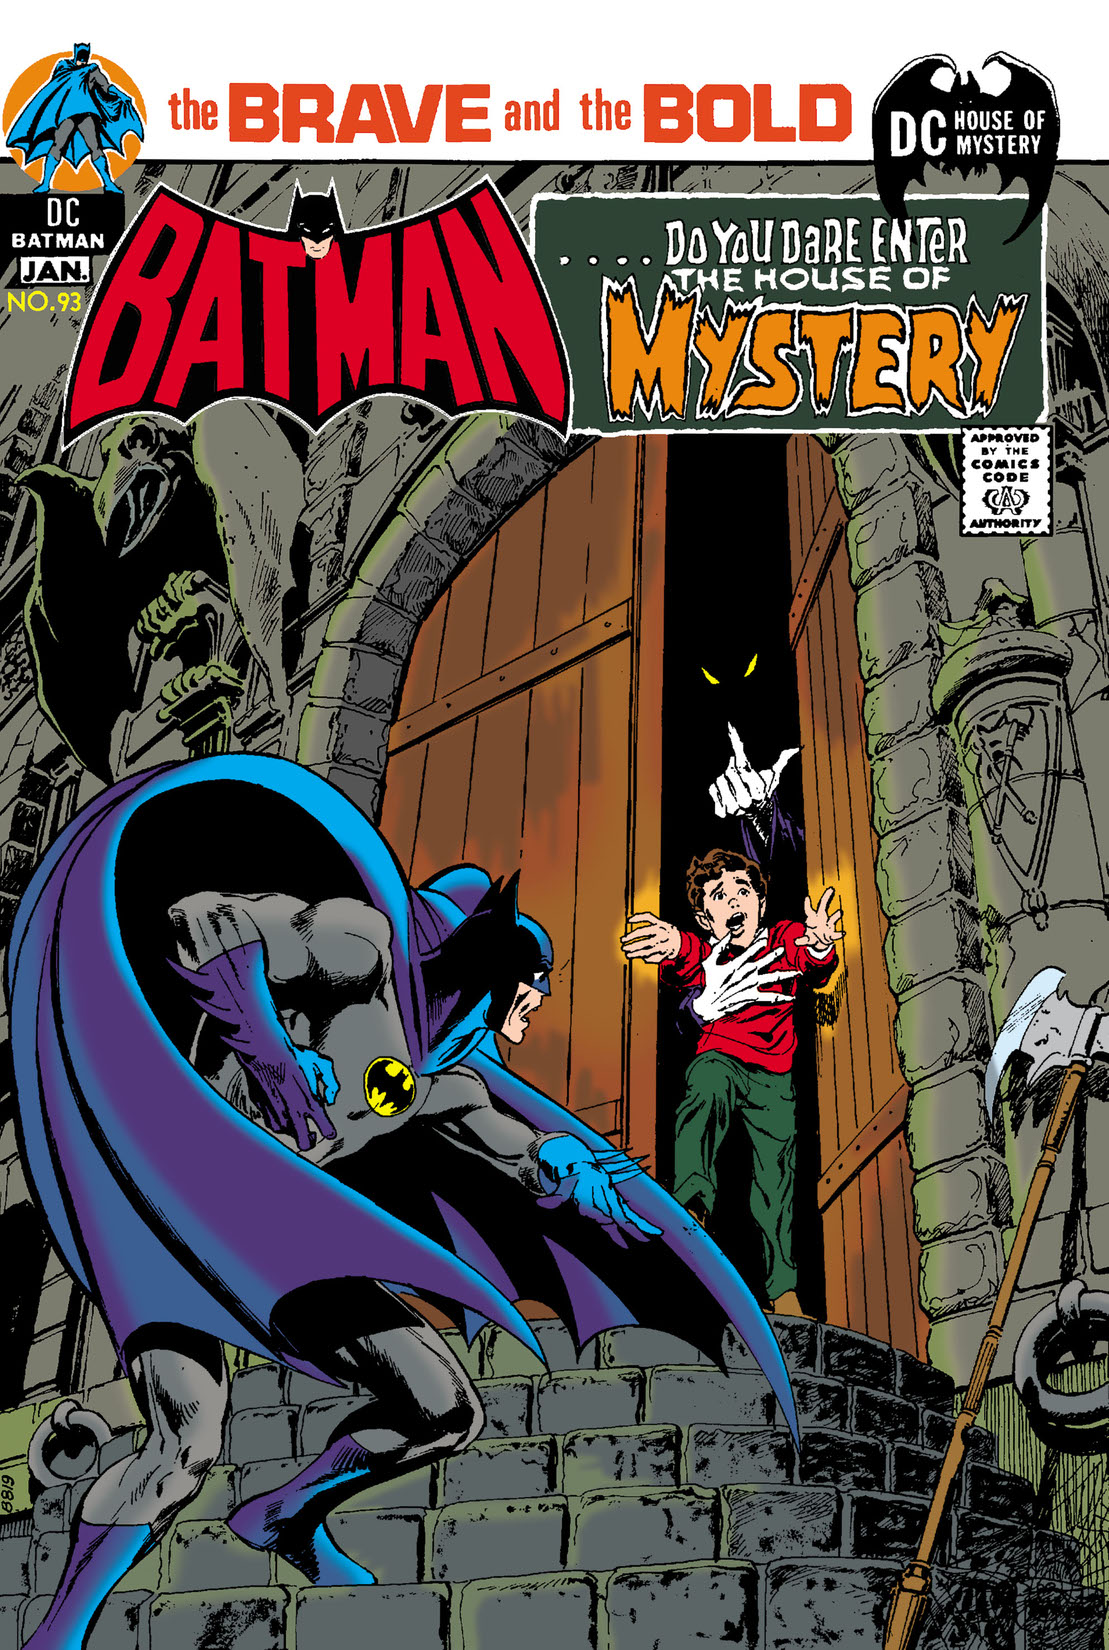 The Brave and the Bold (1955-) #93 preview images